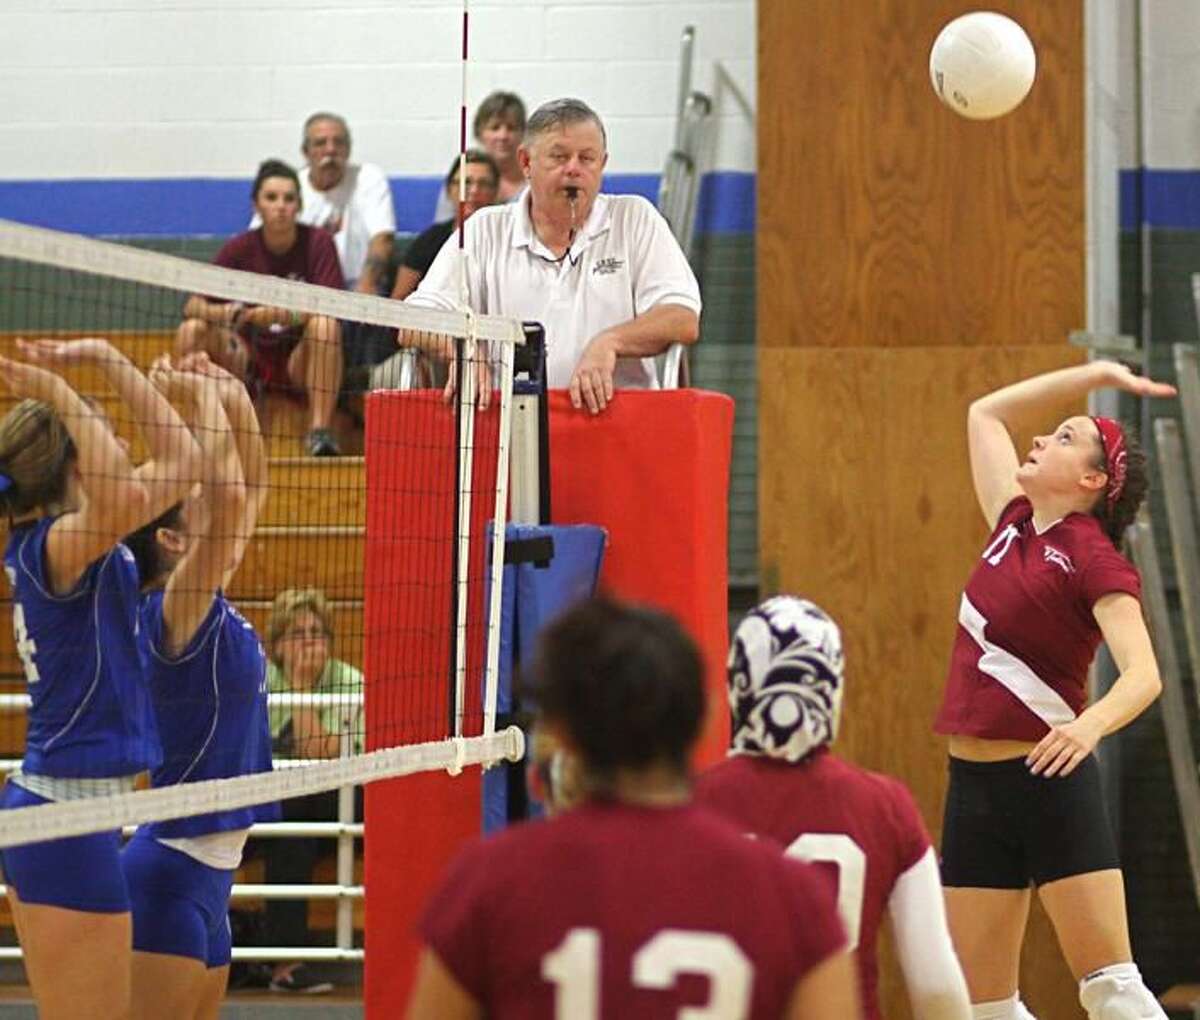 Photo by Russ McCreven North Haven tri-captain Kayla Brown gets set to hit the ball over the net against West Haven.